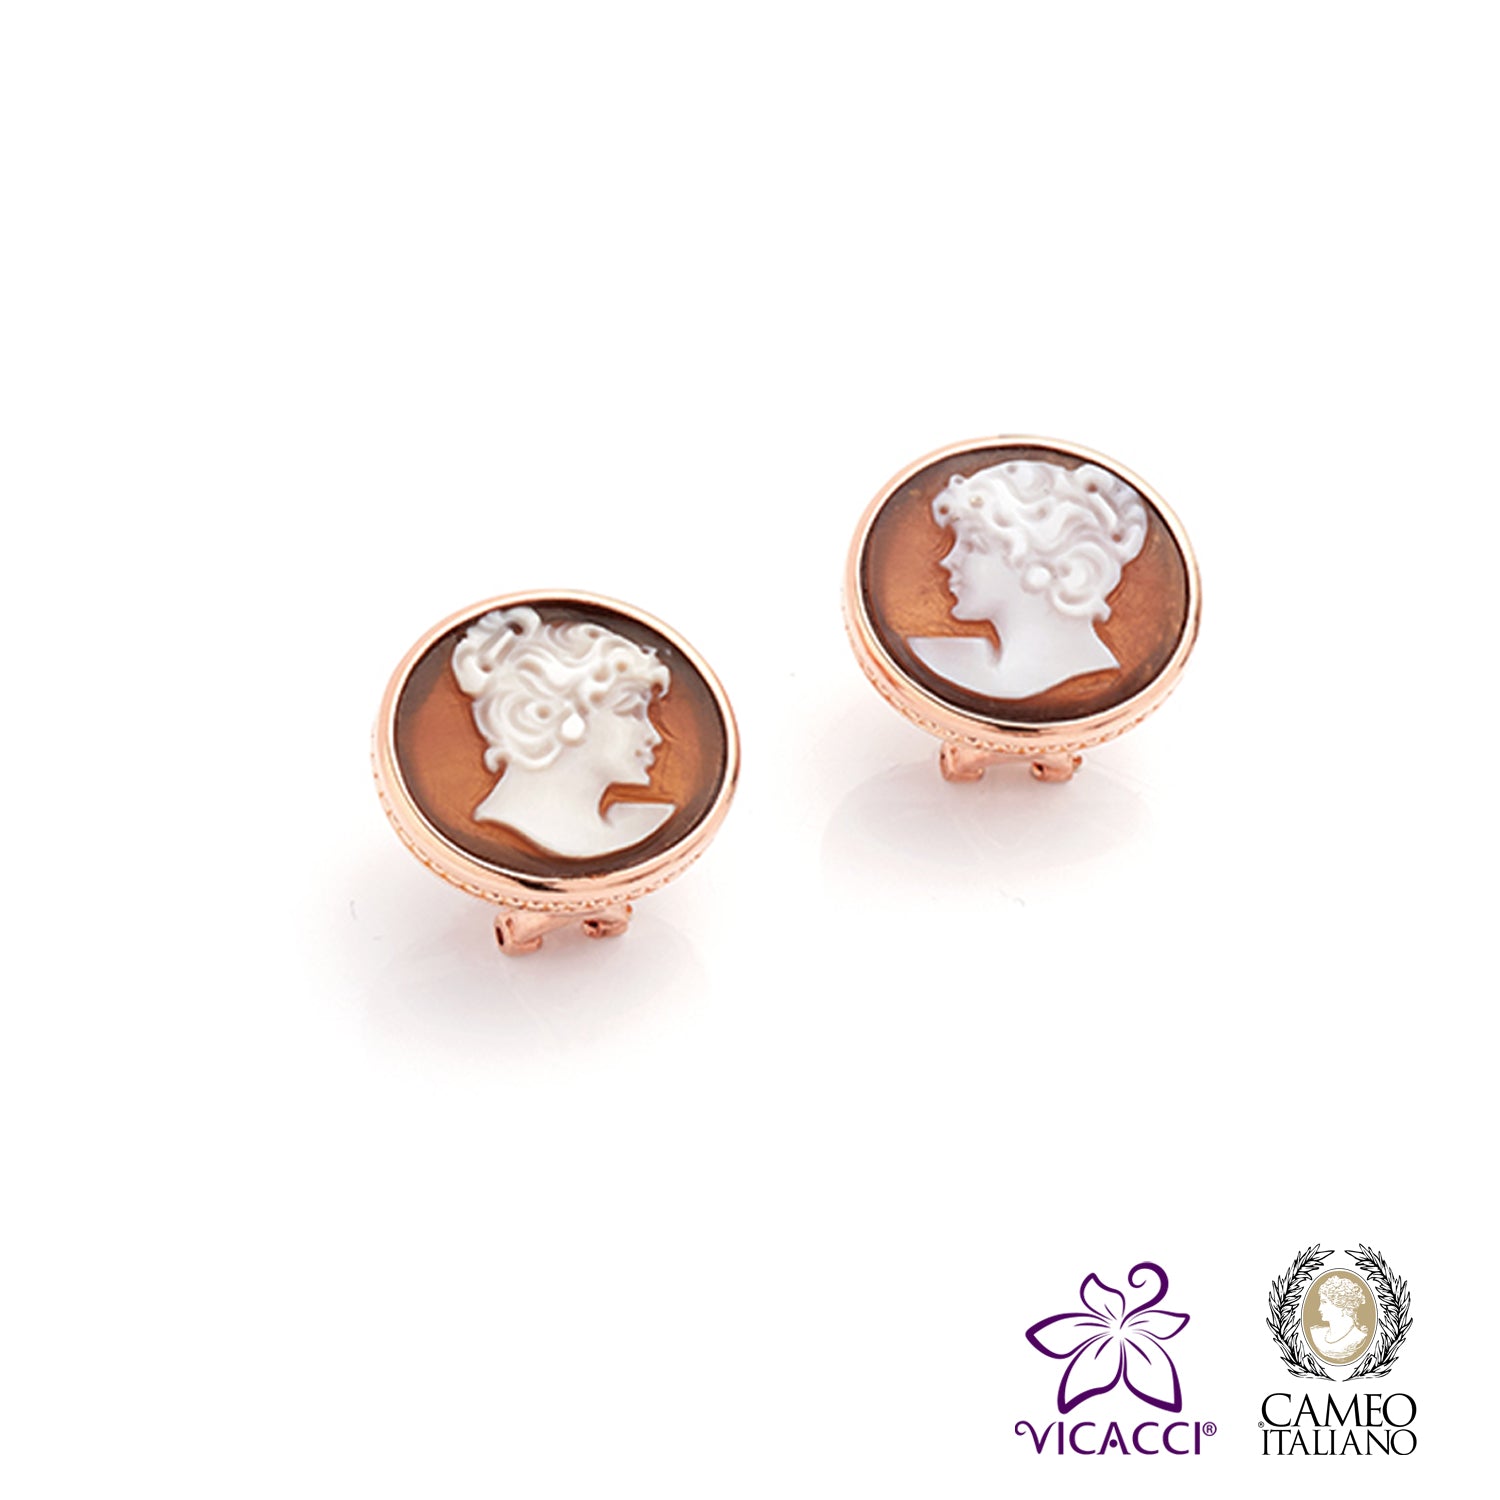 Cameo Italiano, O14 Earrings , Rose Gold Plated Sterling Silver